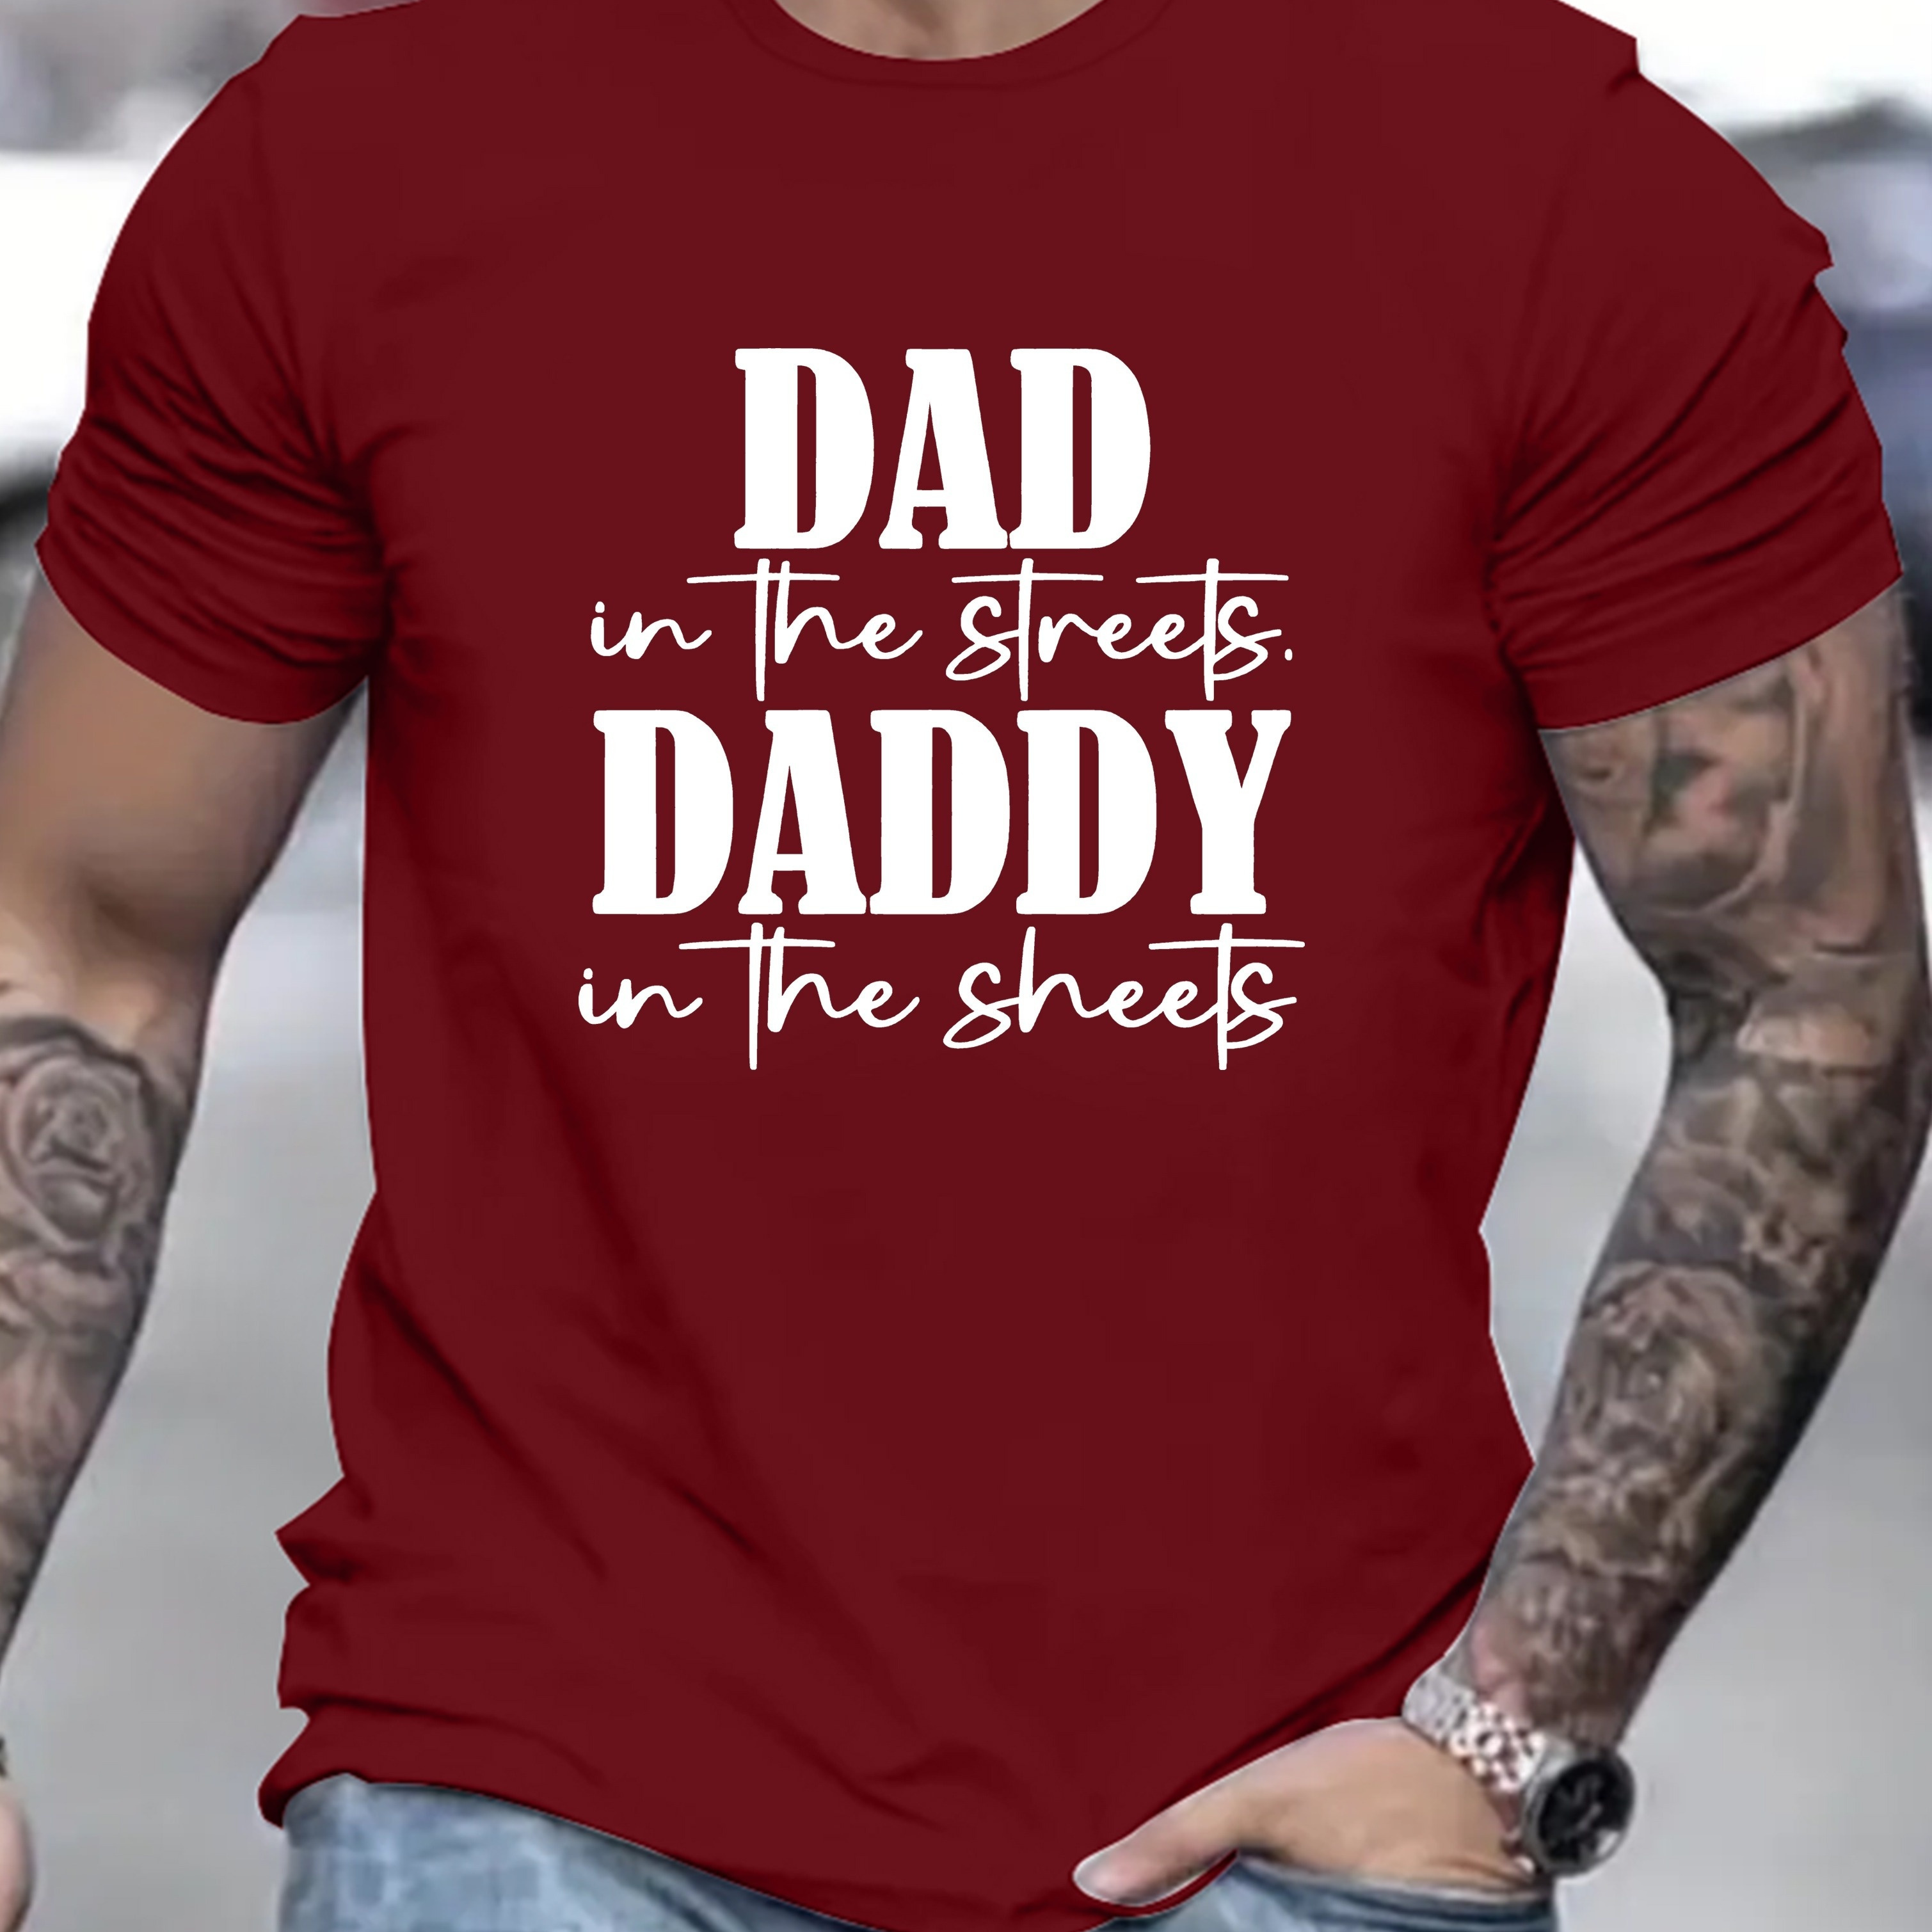 

Men's Casual T-shirt, "dad In The Streets, Daddy In The Sheets" Print, New Arrival Fashion Top, Comfort Fit Tee